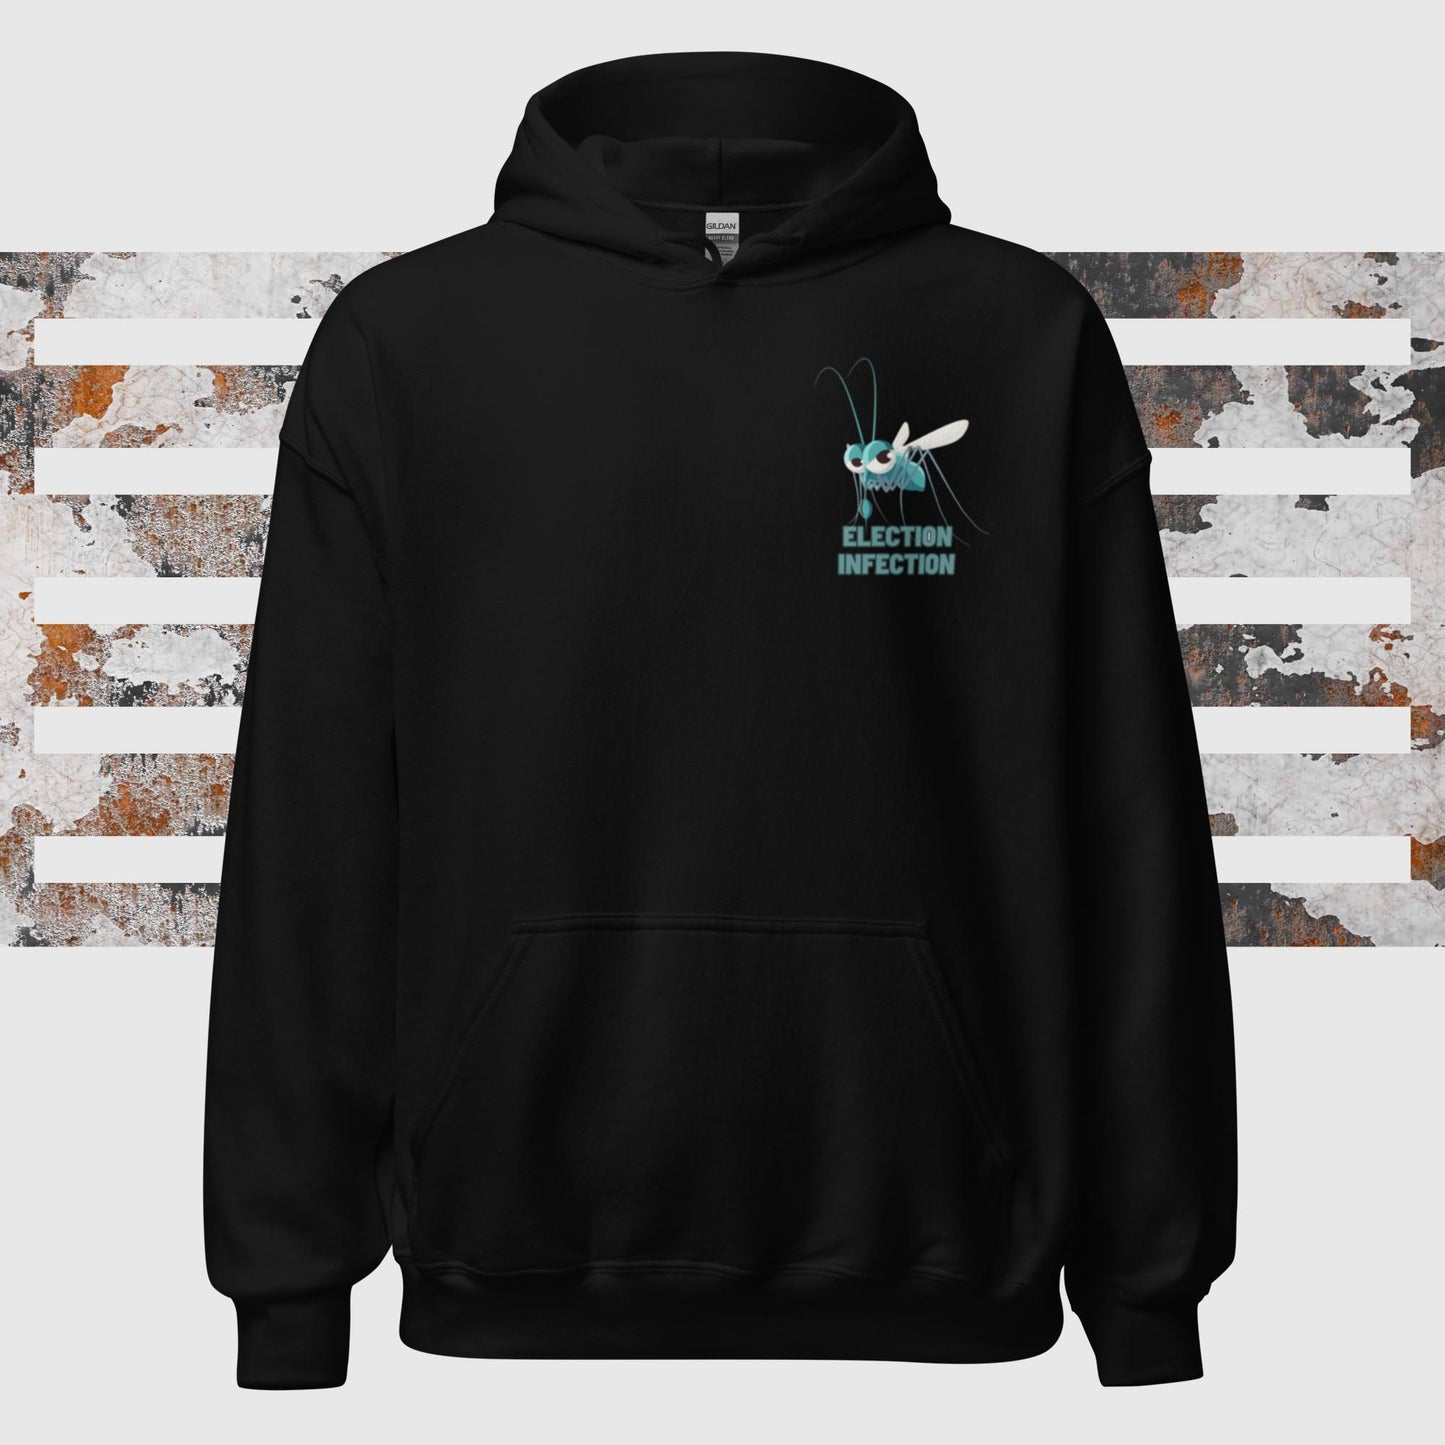 Election Infection Hoodie